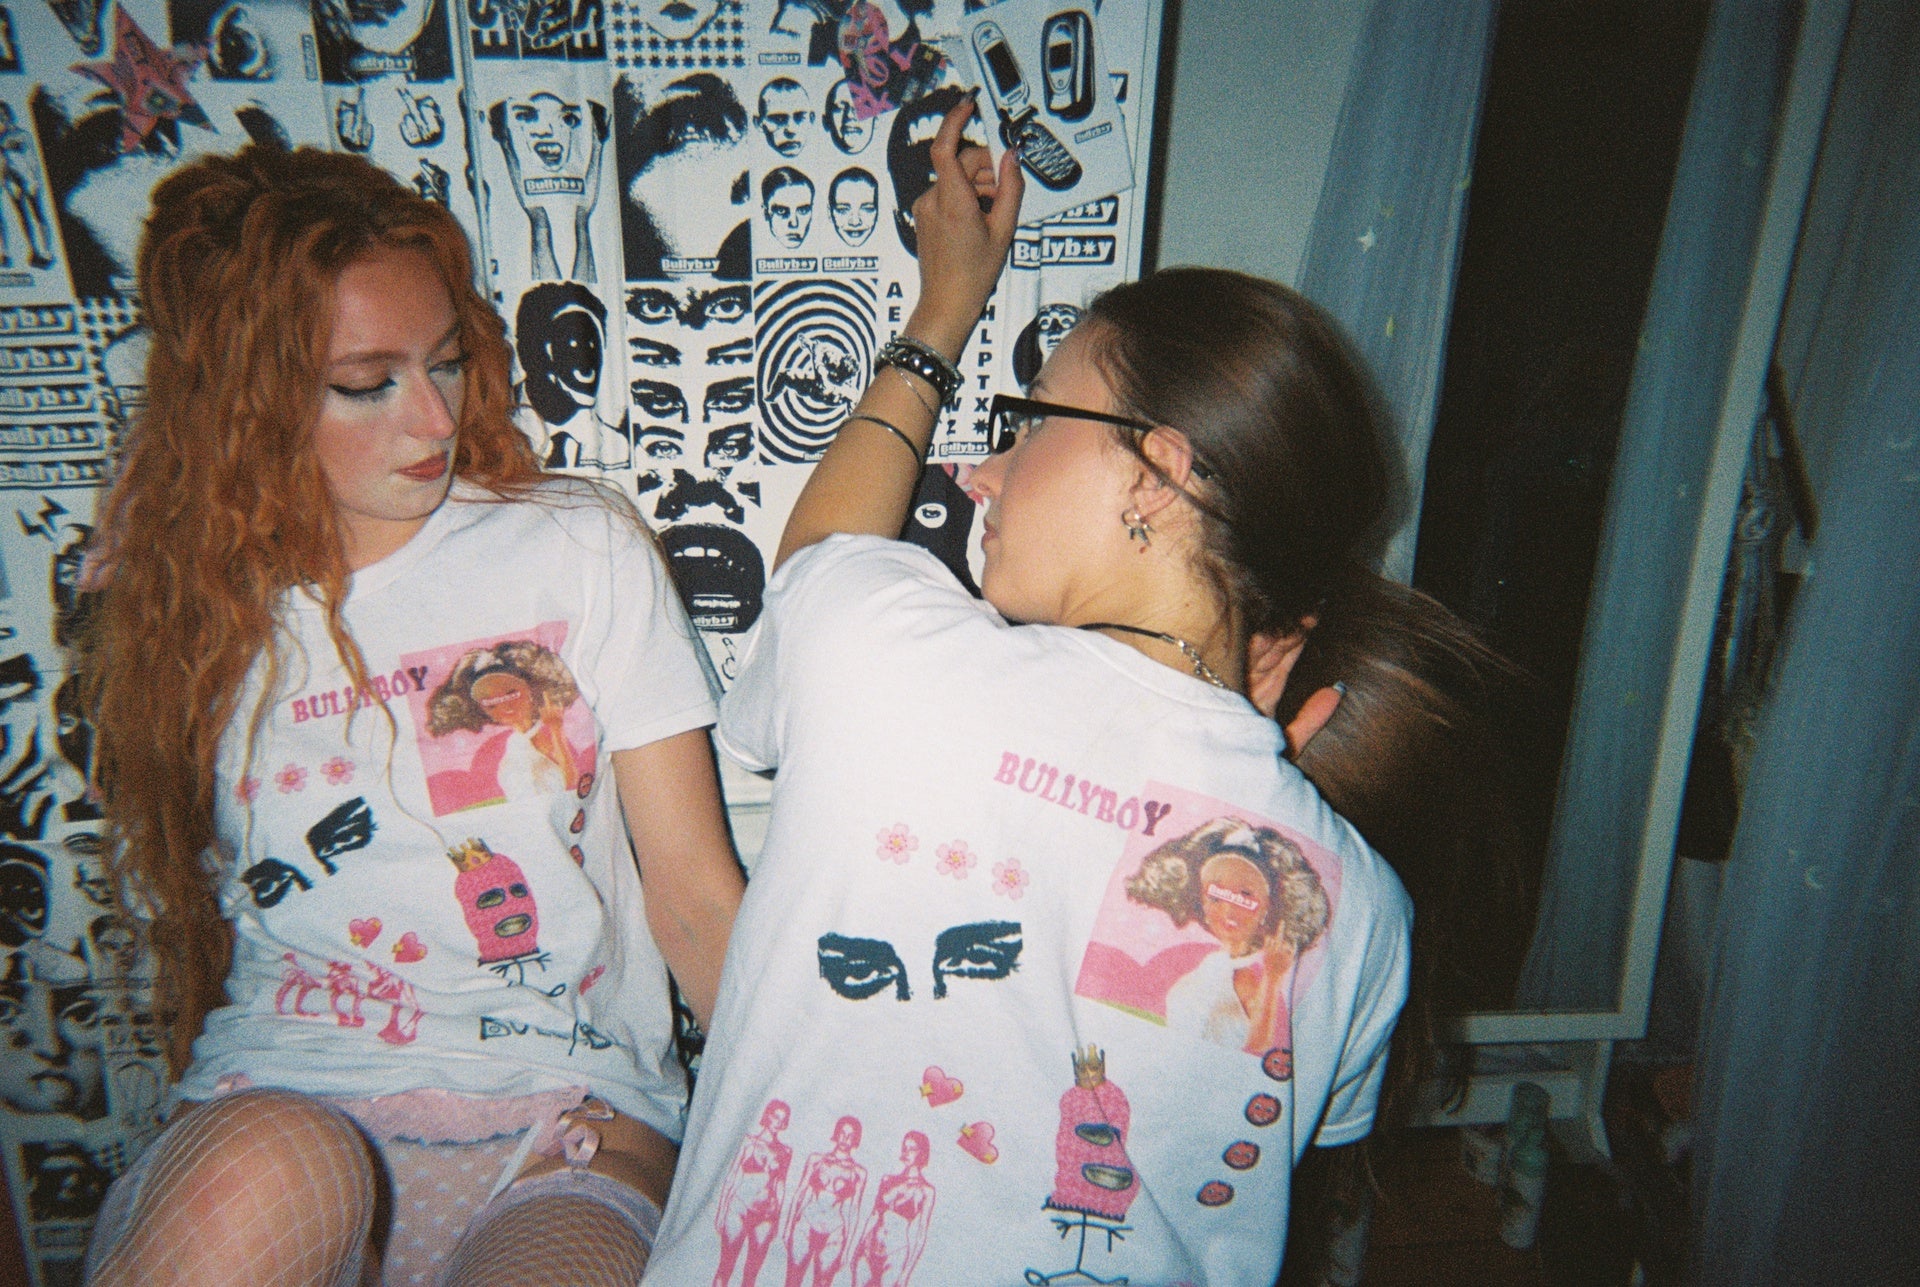 Two Bullyboy models wearing the Bullyboy CNTY t-shirt with the Bullyboy stickers featured in the background